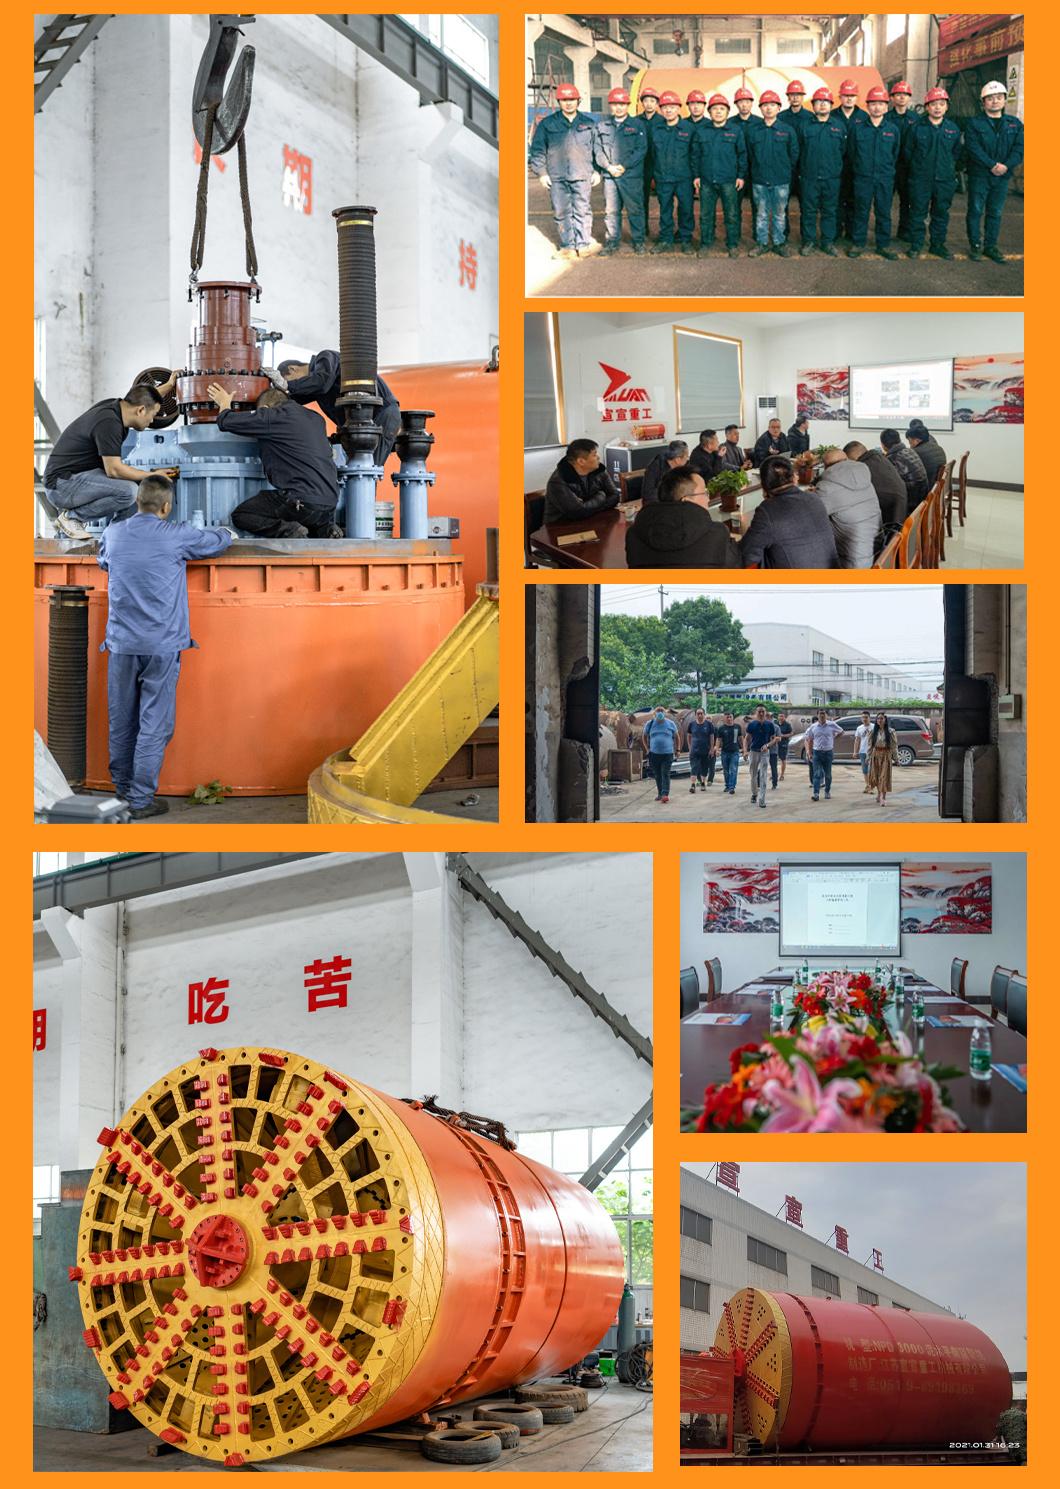 High Quality Efficient Trenchless Project Ysd3000 Rock Pipe Jacking Machine for Rcc